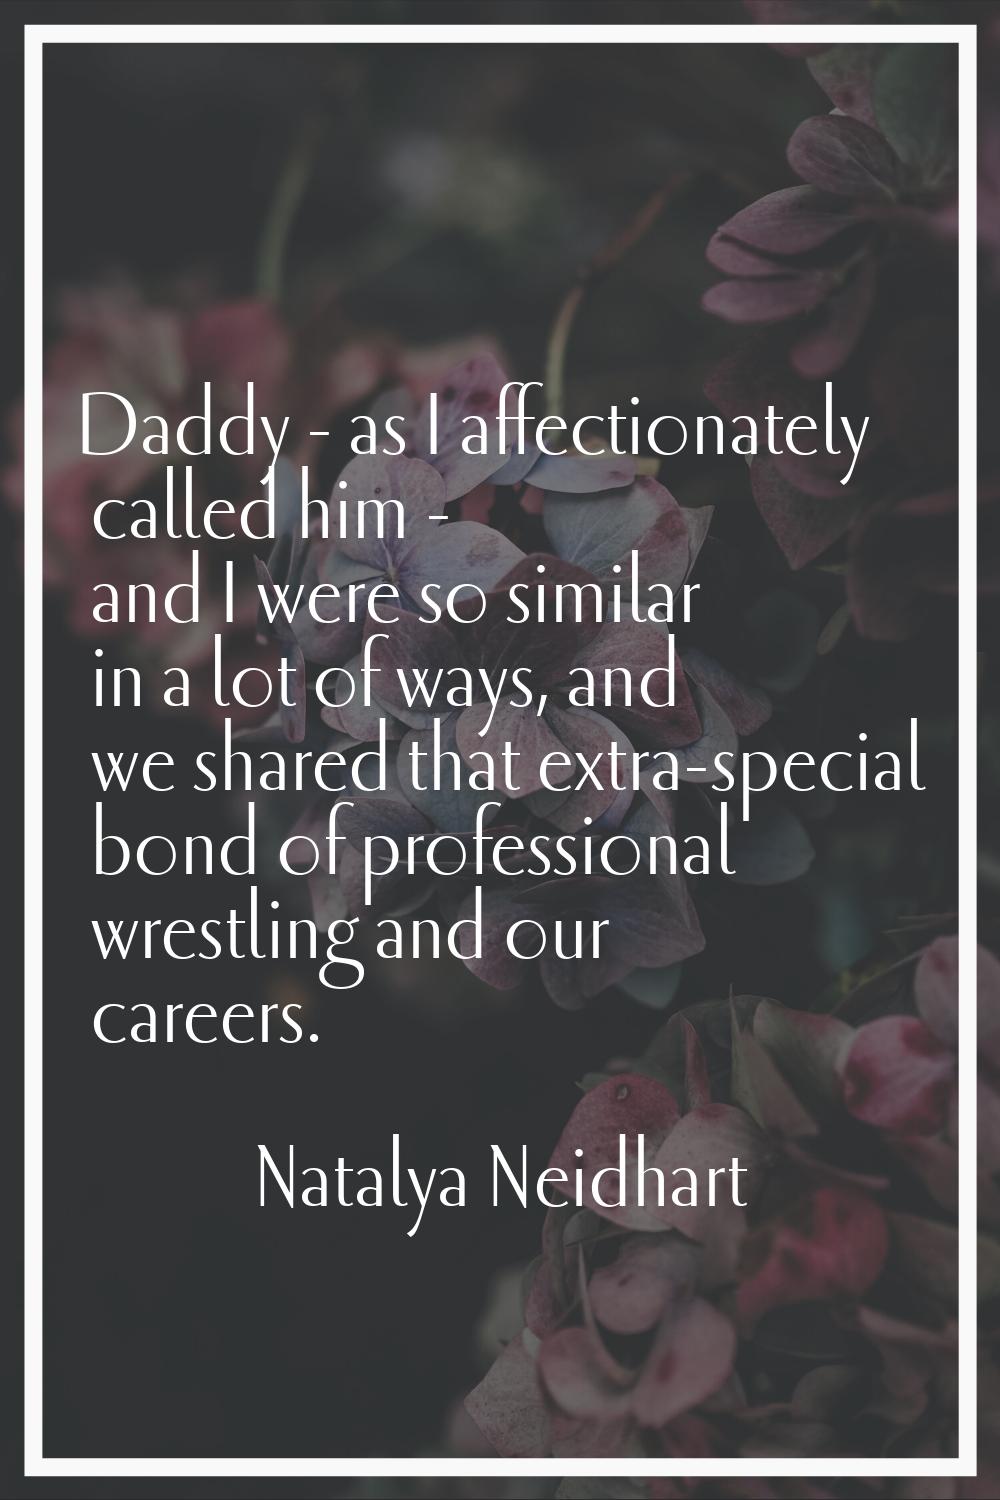 Daddy - as I affectionately called him - and I were so similar in a lot of ways, and we shared that